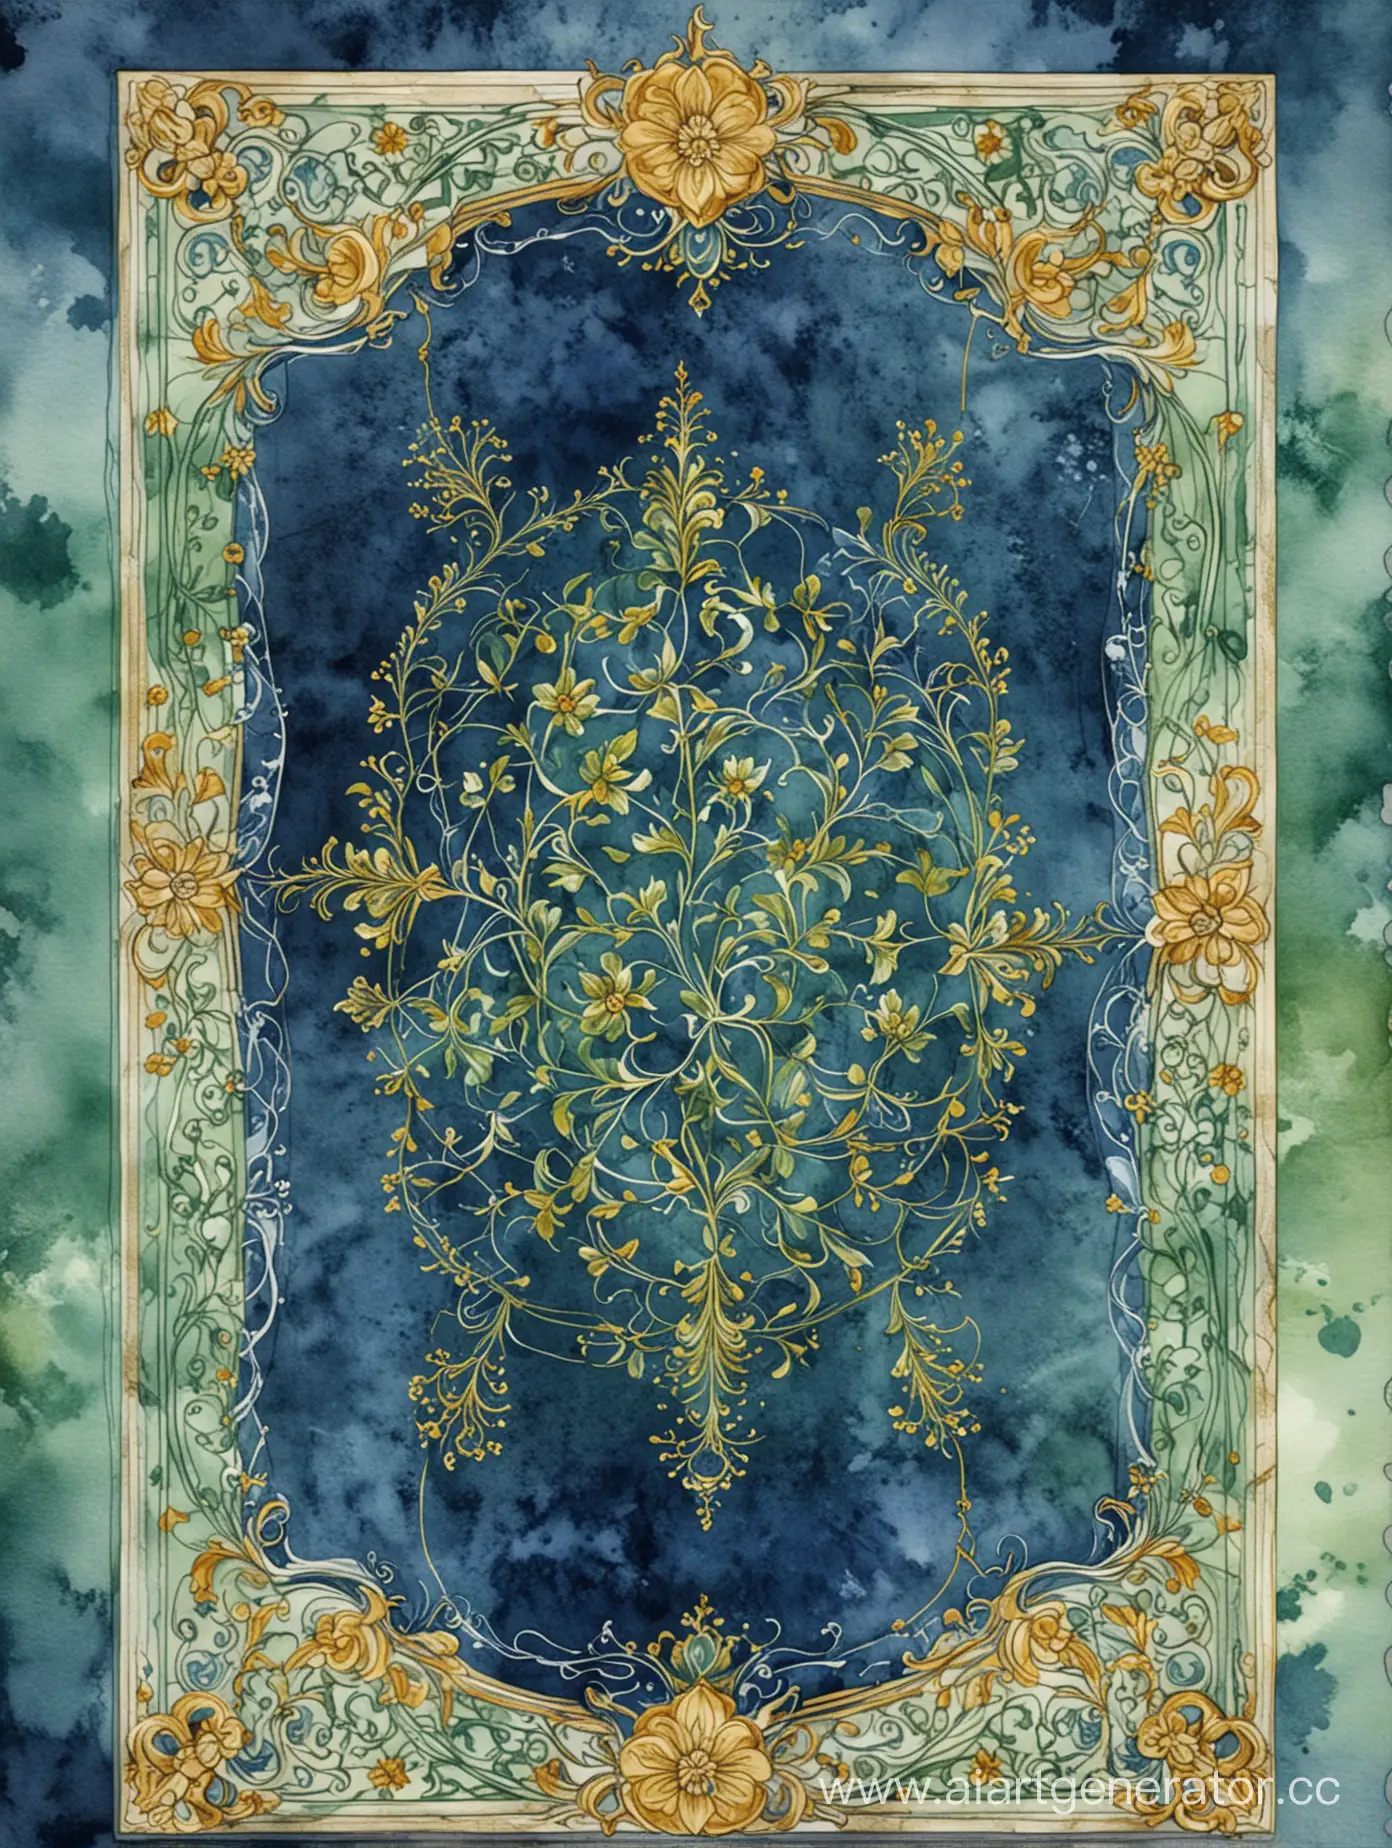 Watercolor-Tarot-Card-with-Intricate-Golden-Floral-Border-on-Dark-Blue-Marble-Background